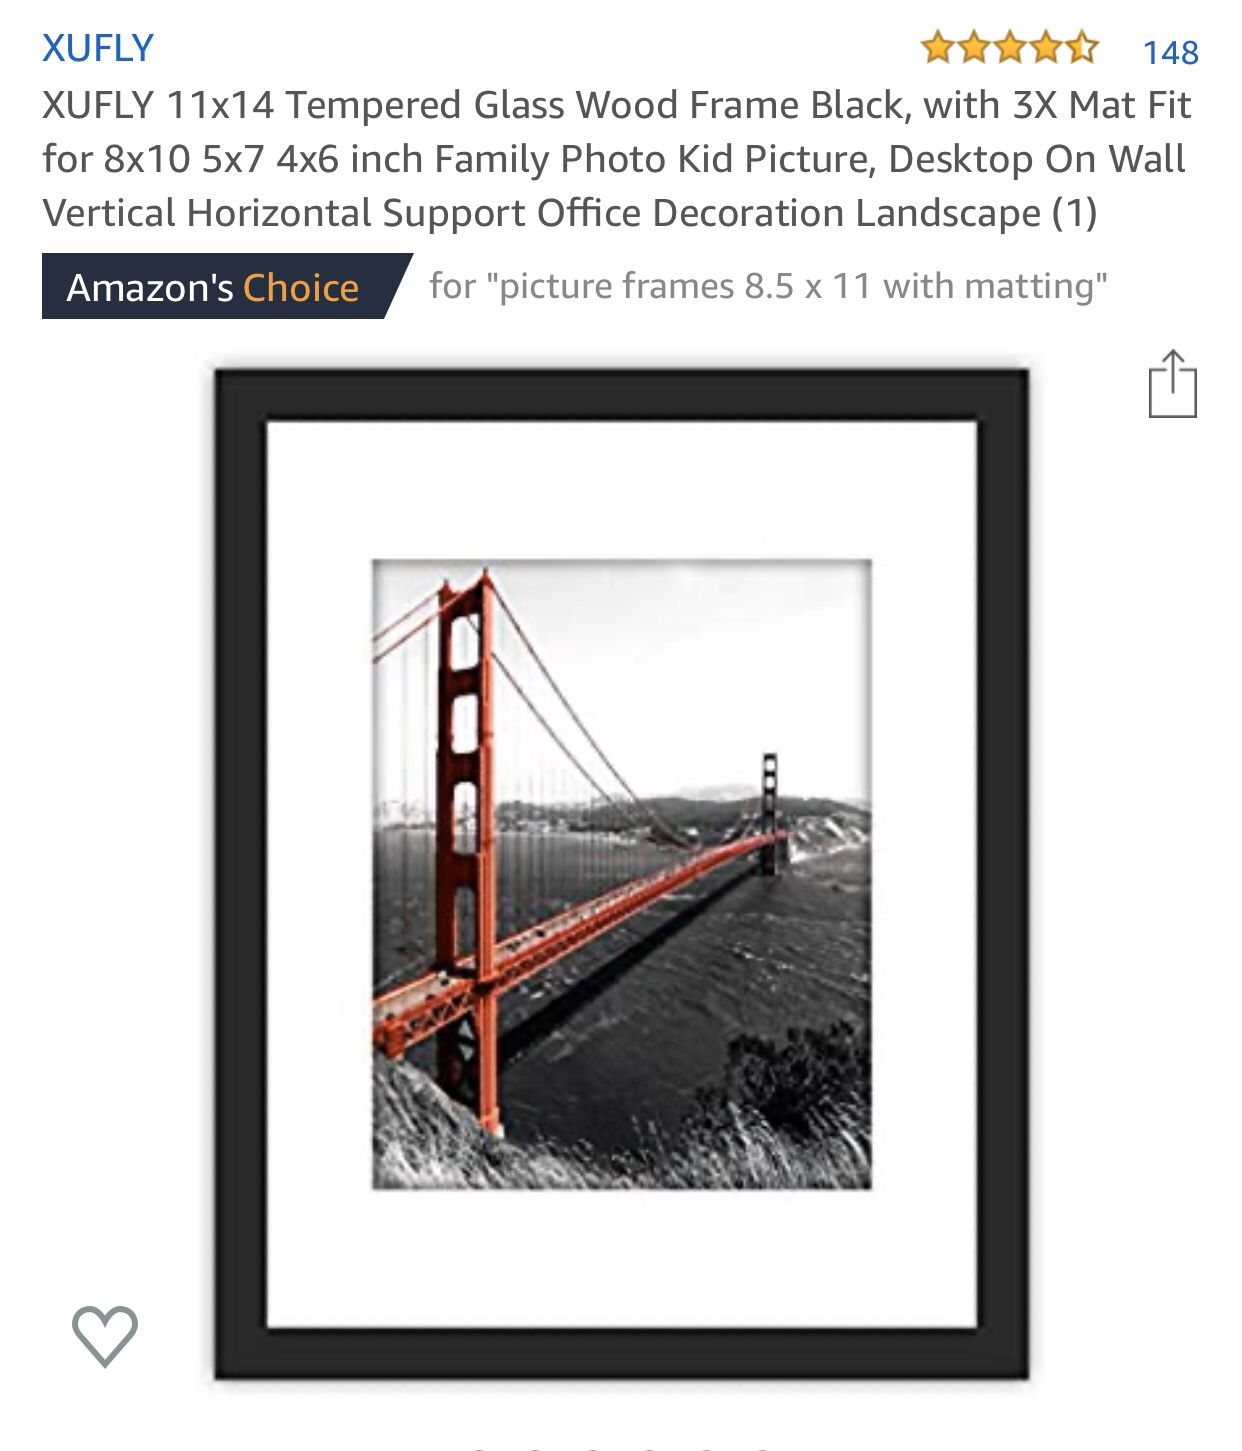 XUFLY 11x14 Tempered Glass Wood Frame Black, with 3X Mat Fit for 8x10 5x7 4x6 inch Family Photo Kid Picture, Desktop On Wall Vertical Horizontal Supp